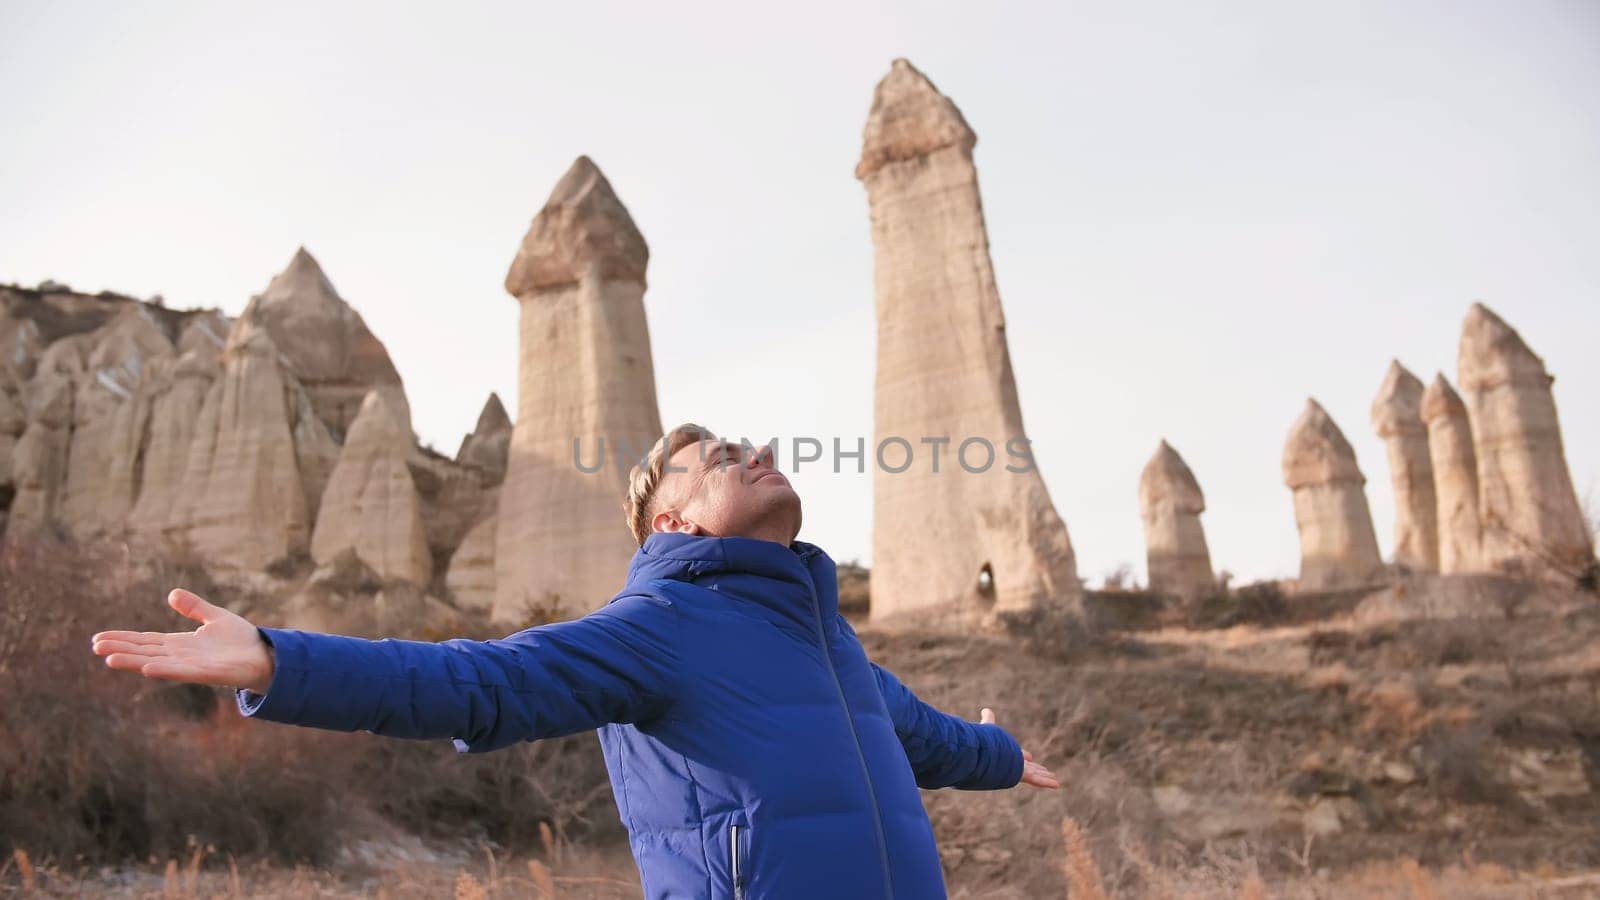 Russian tourist energized in the Valley of Love in Goreme Cappadocia Turkey during the freezing winter months